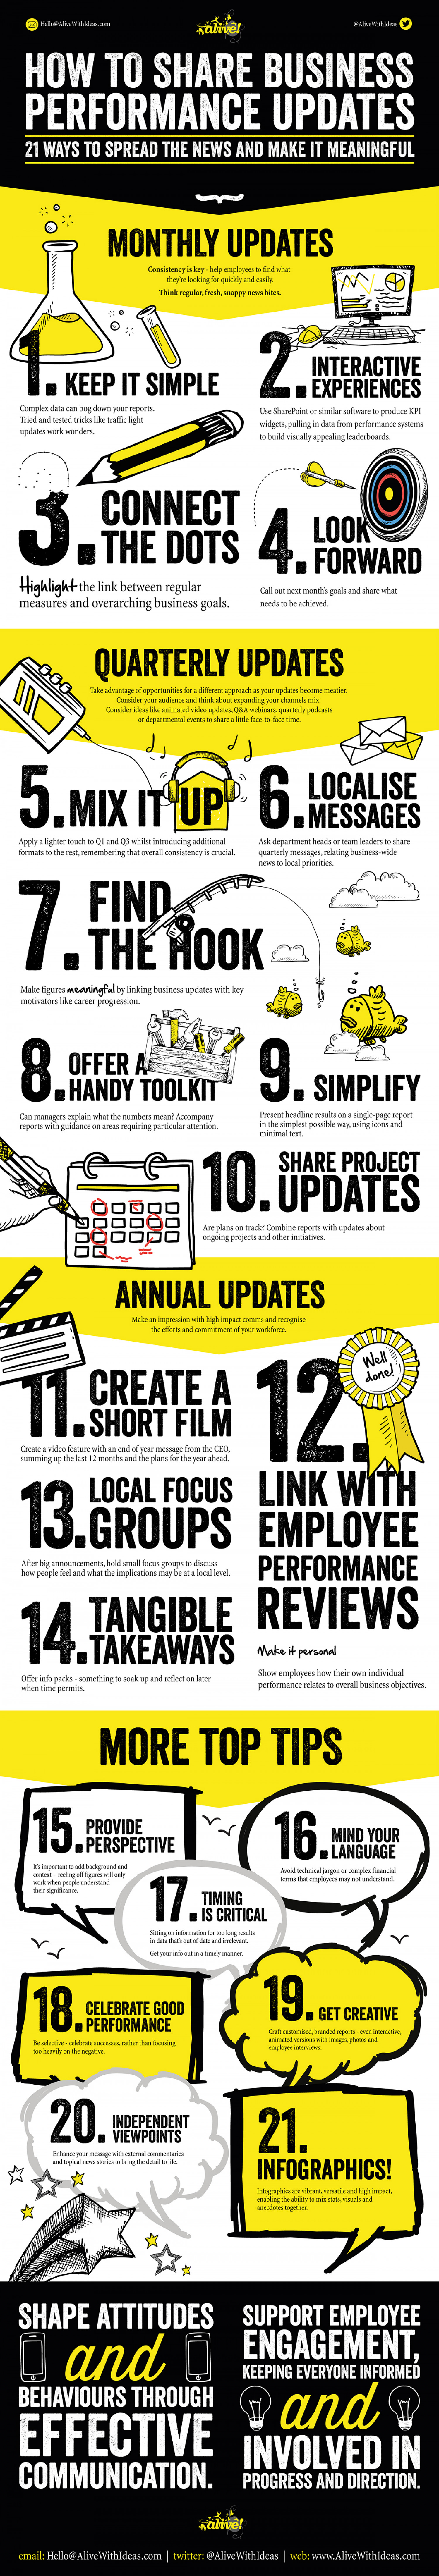 How to Share Business Performance Updates With Employees Infographic